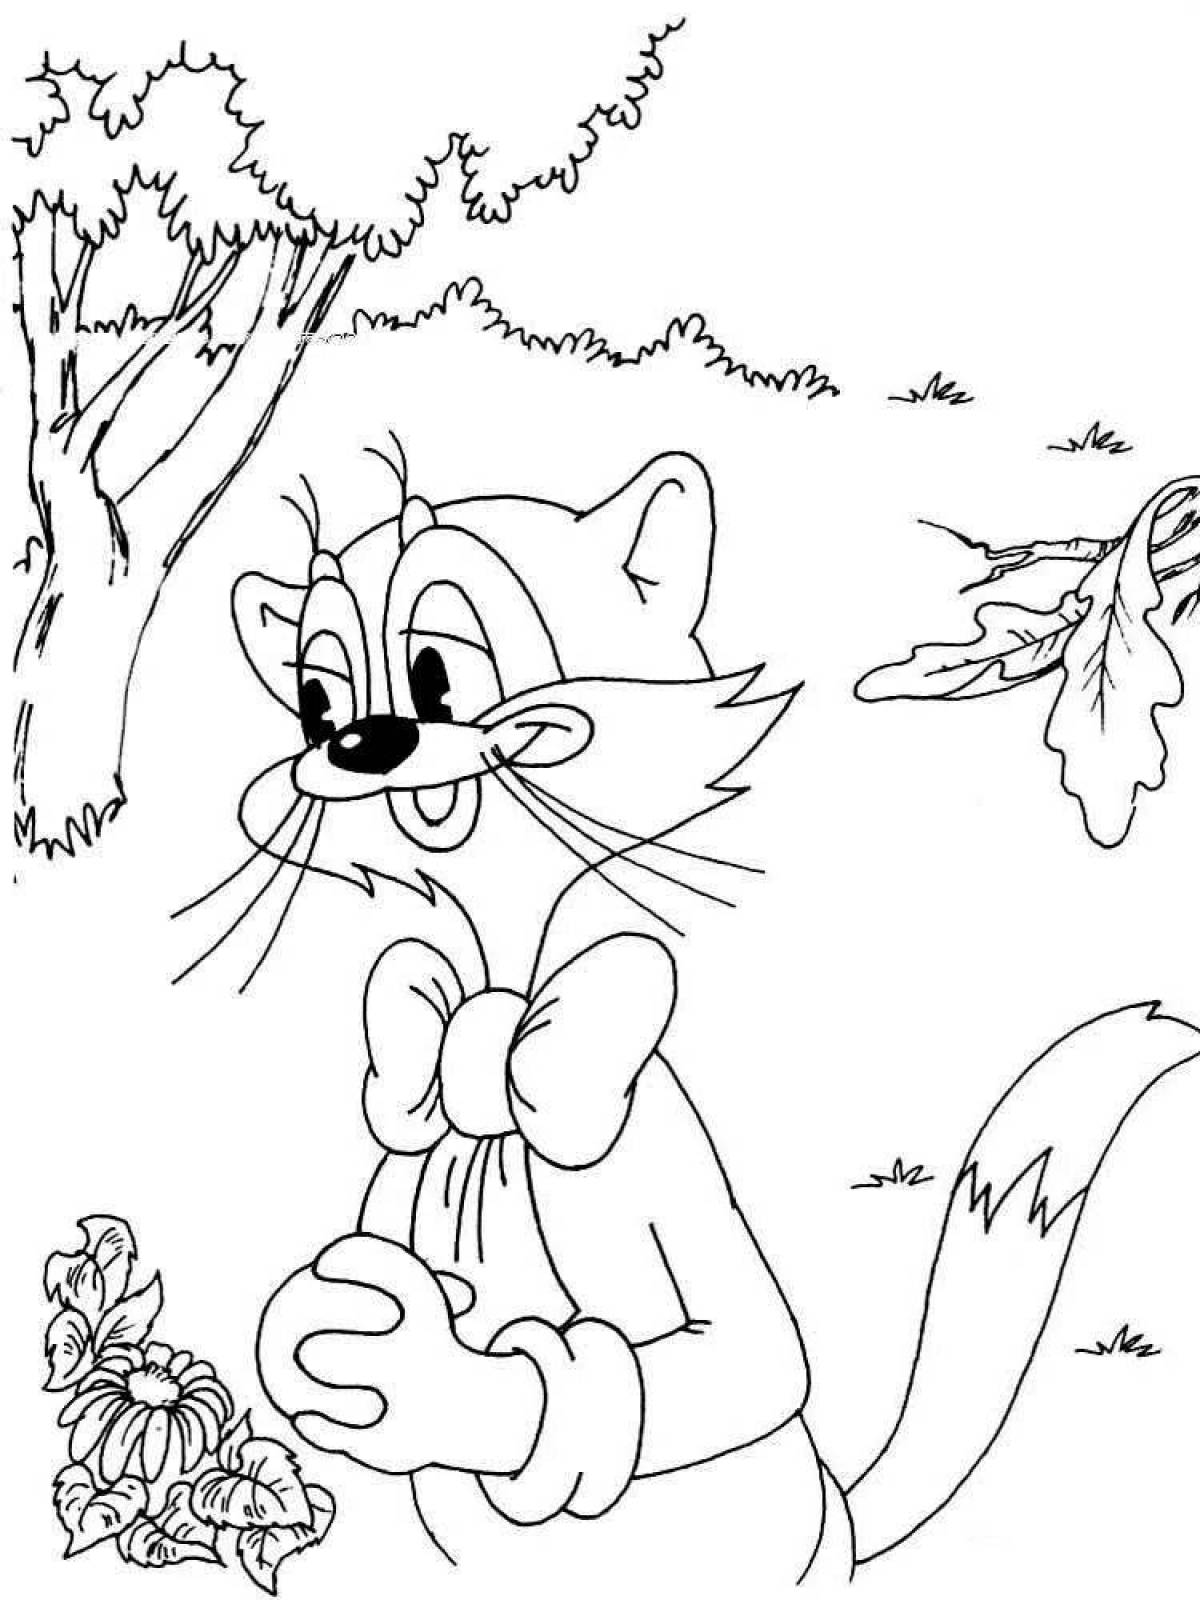 Leopold cat glitter coloring book for kids